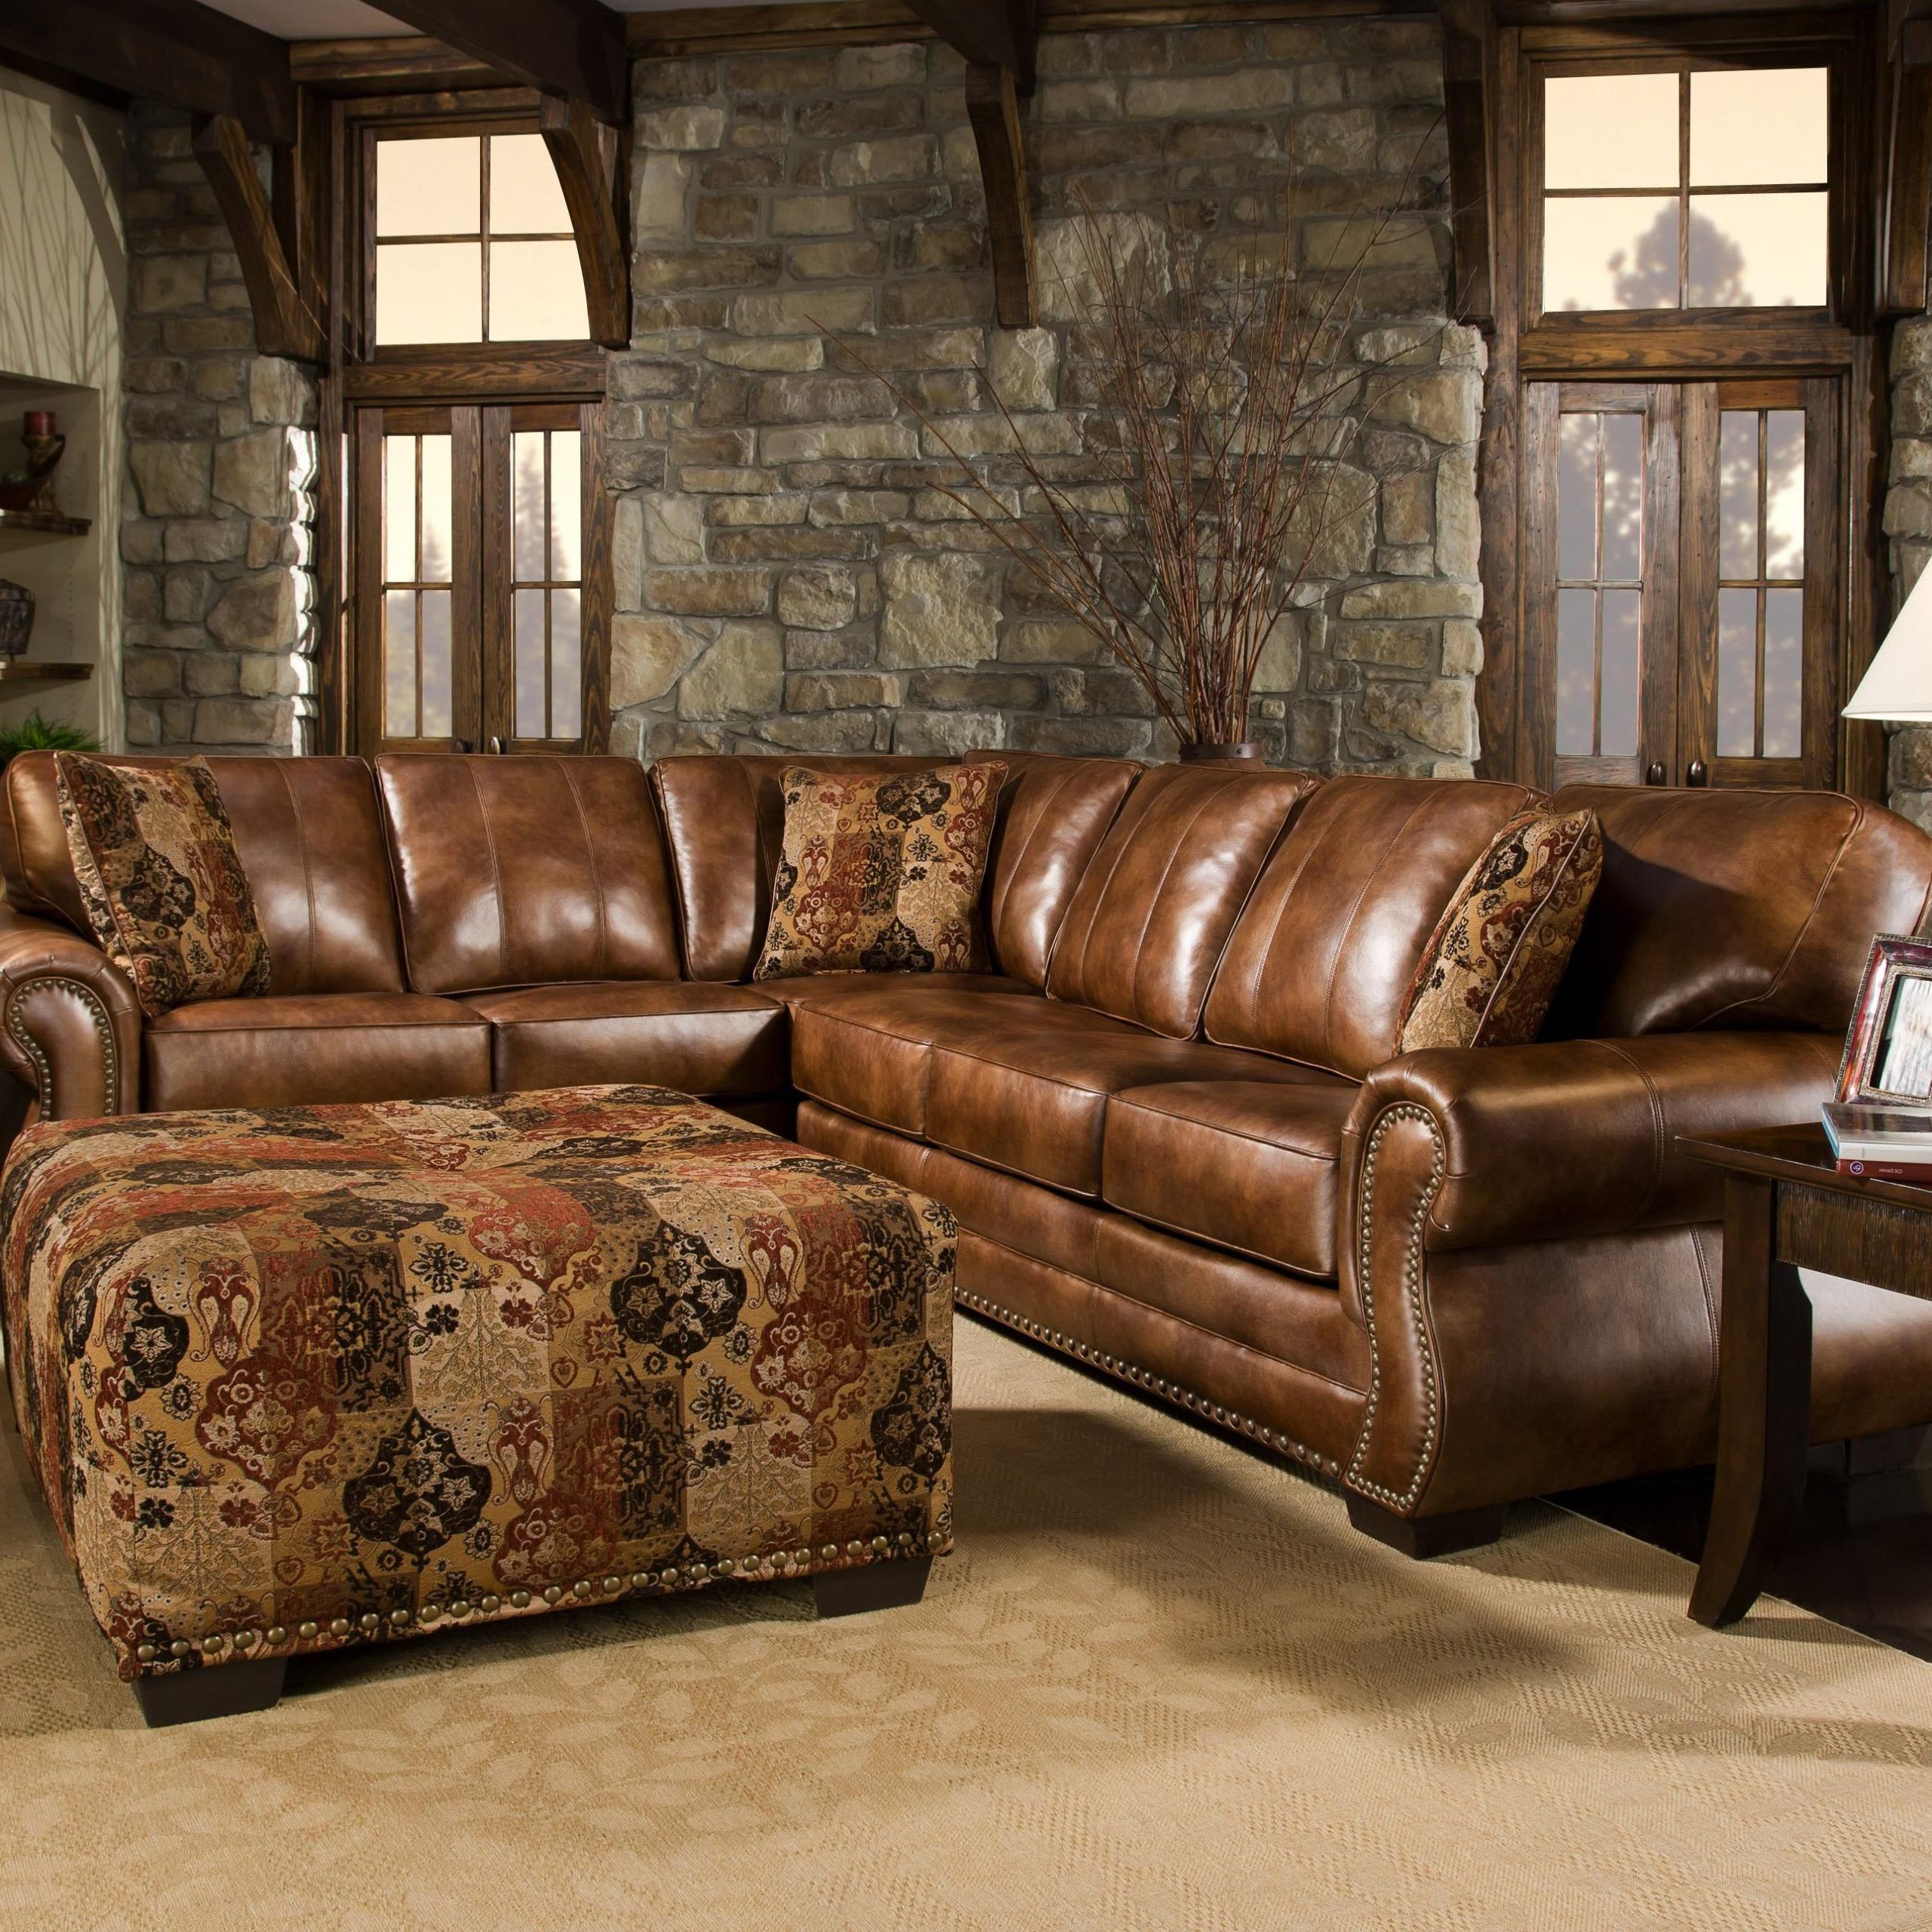 Widely Used 3 Piece Leather Sectional Sofa Sets With Regard To Sectional Sofacorinthian. Beautiful (View 14 of 15)